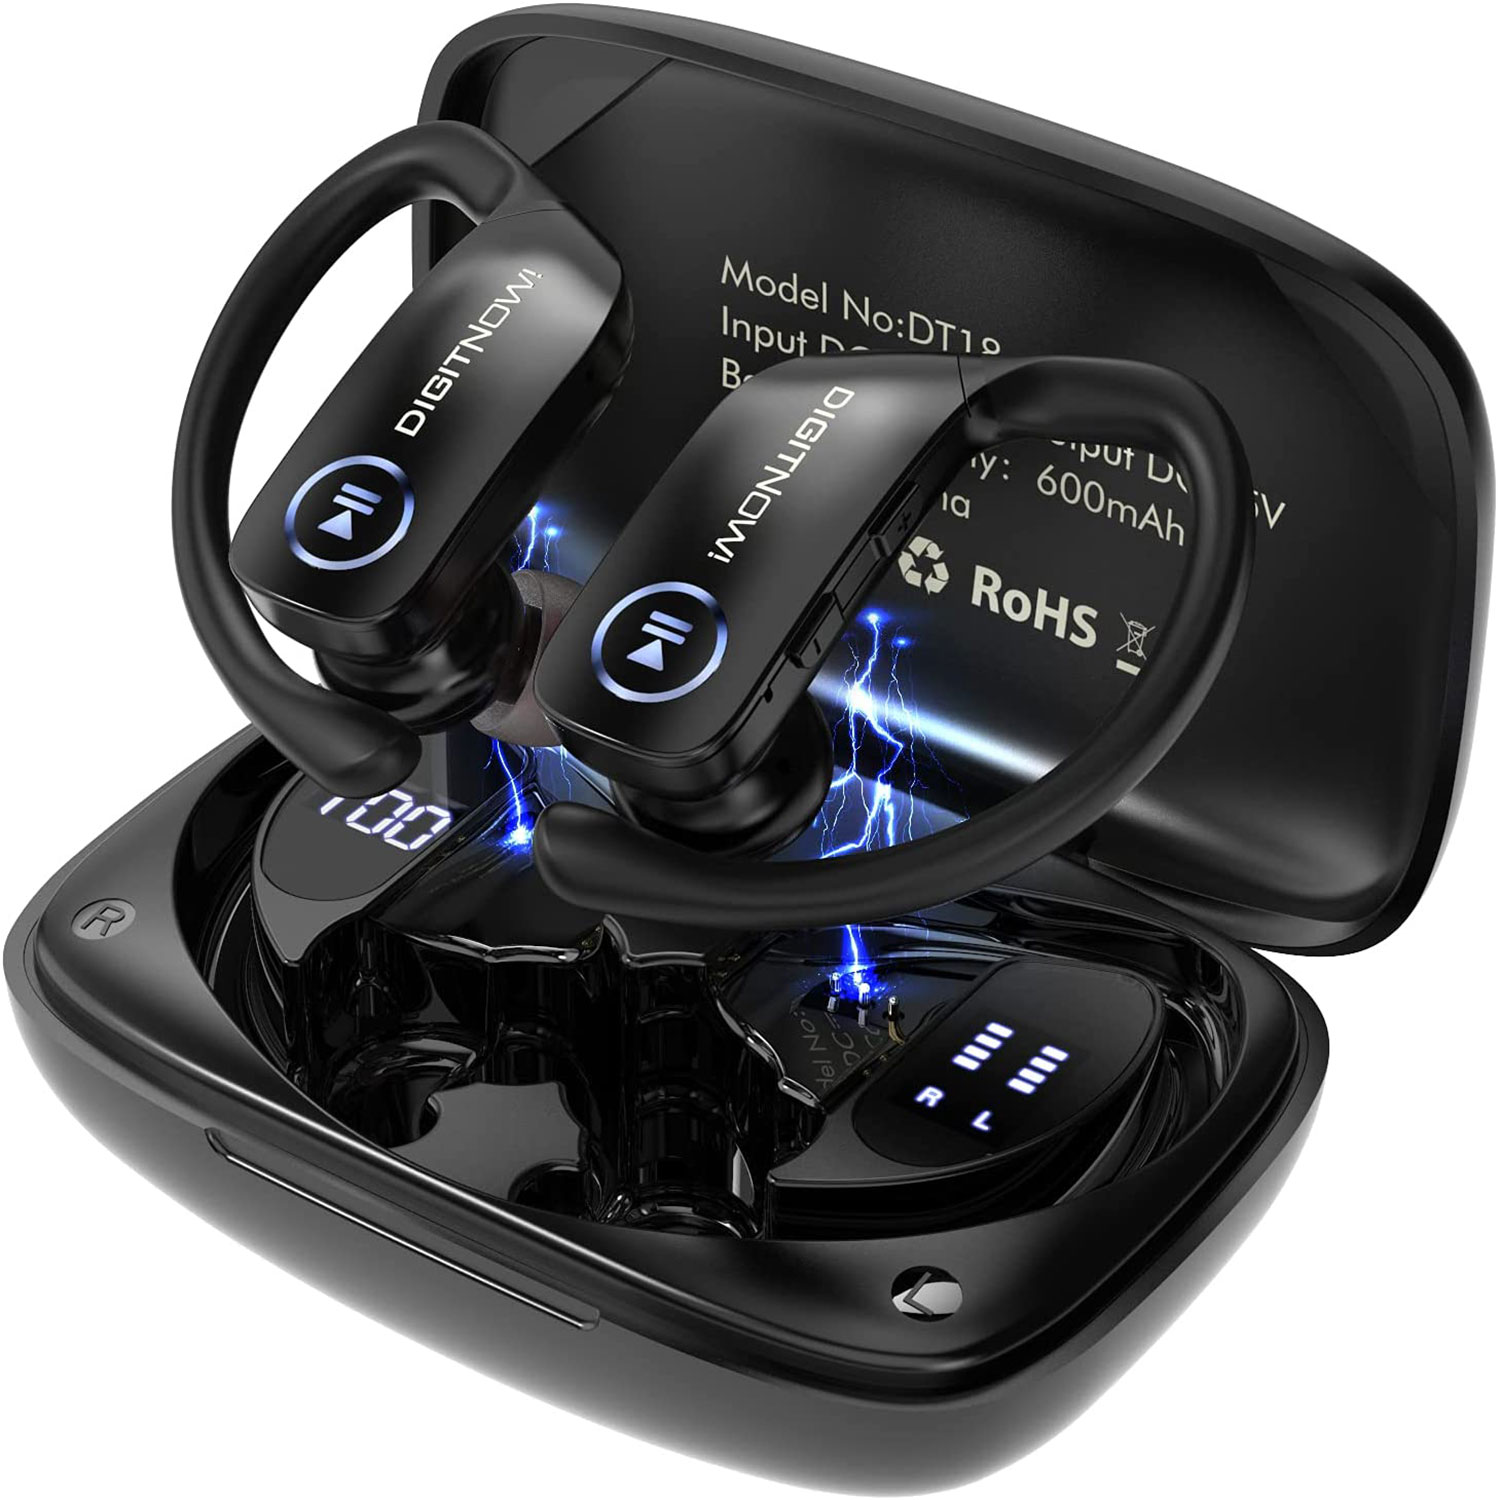 DIGITNOW Wireless Earbuds Bluetooth 5.0 Headphones 48Hrs Play Back Touch Control with LED Display Charging Case Waterproof Stereo Earphones in-Ear Built-in Mic Headset Deep Bass for Sport Workout